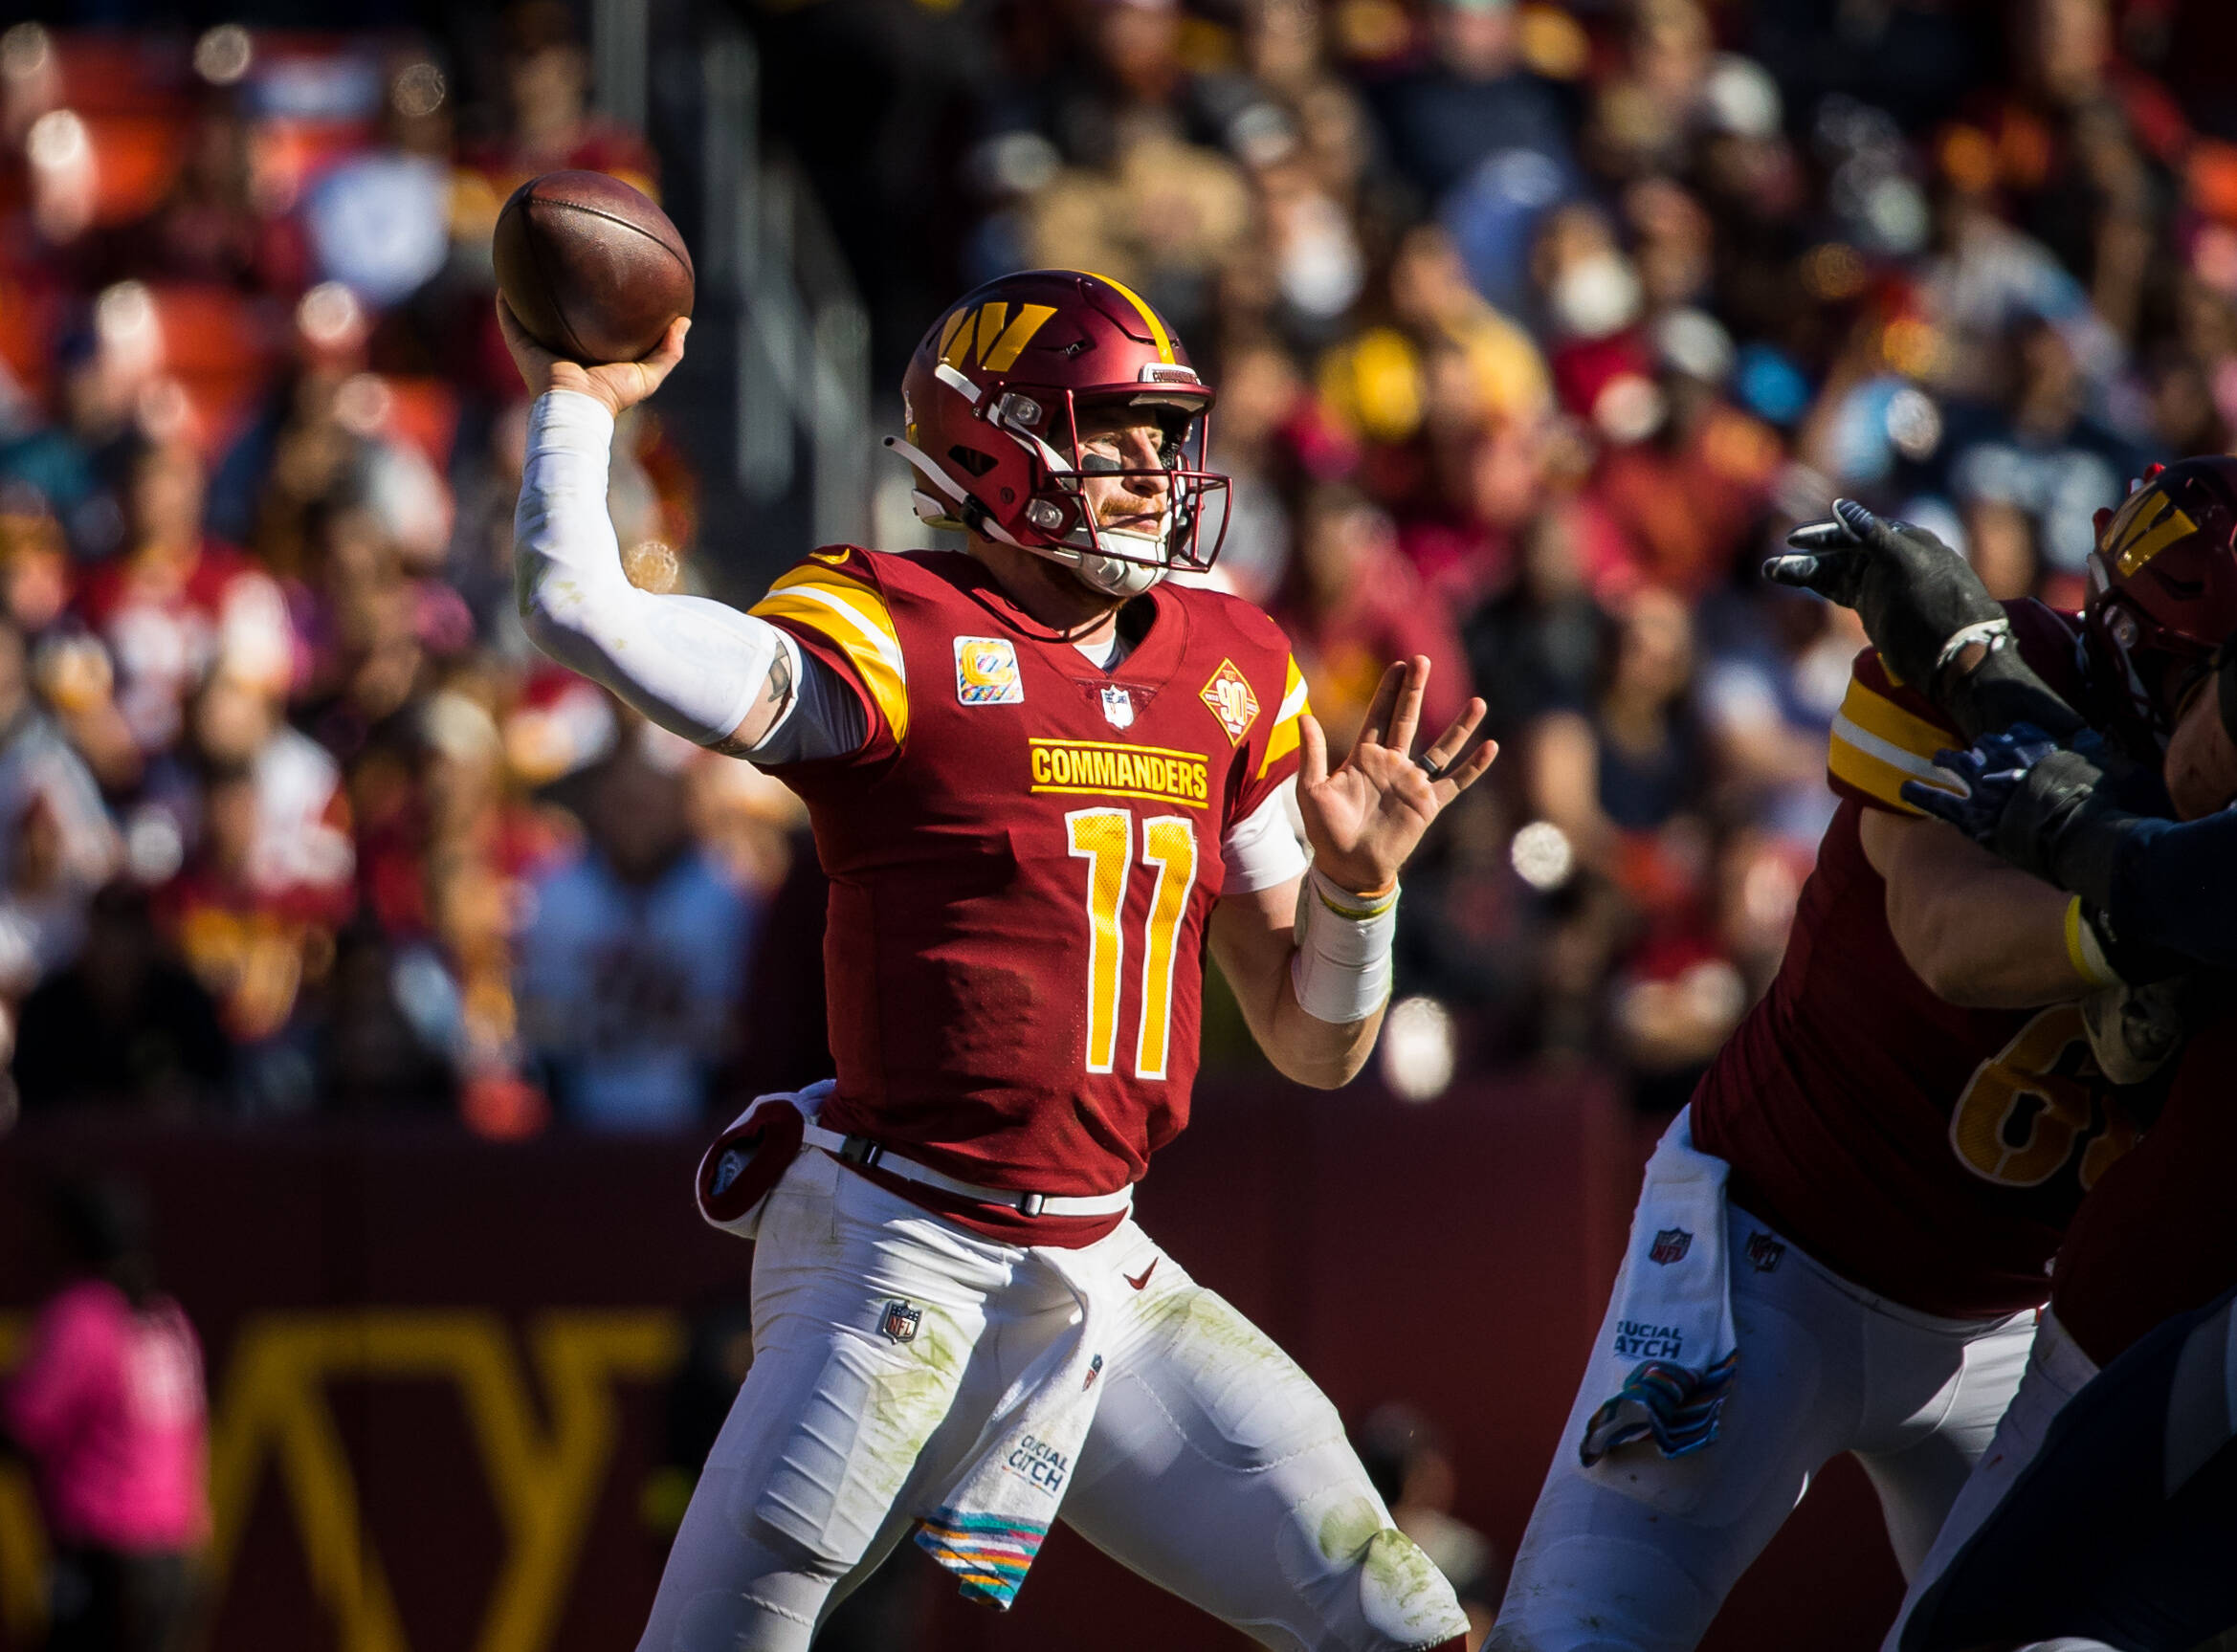 October 9, 2022 : Washington Commanders quarterback Carson Wentz 11 drops back to pass during the game between the Tennessee Titans and Washington Commanders played at FedEx Field in Landover, MD. Photographer: Landover USA - ZUMAc04_ 20221009_zaf_c04_161 Copyright: xCoryxRoysterx